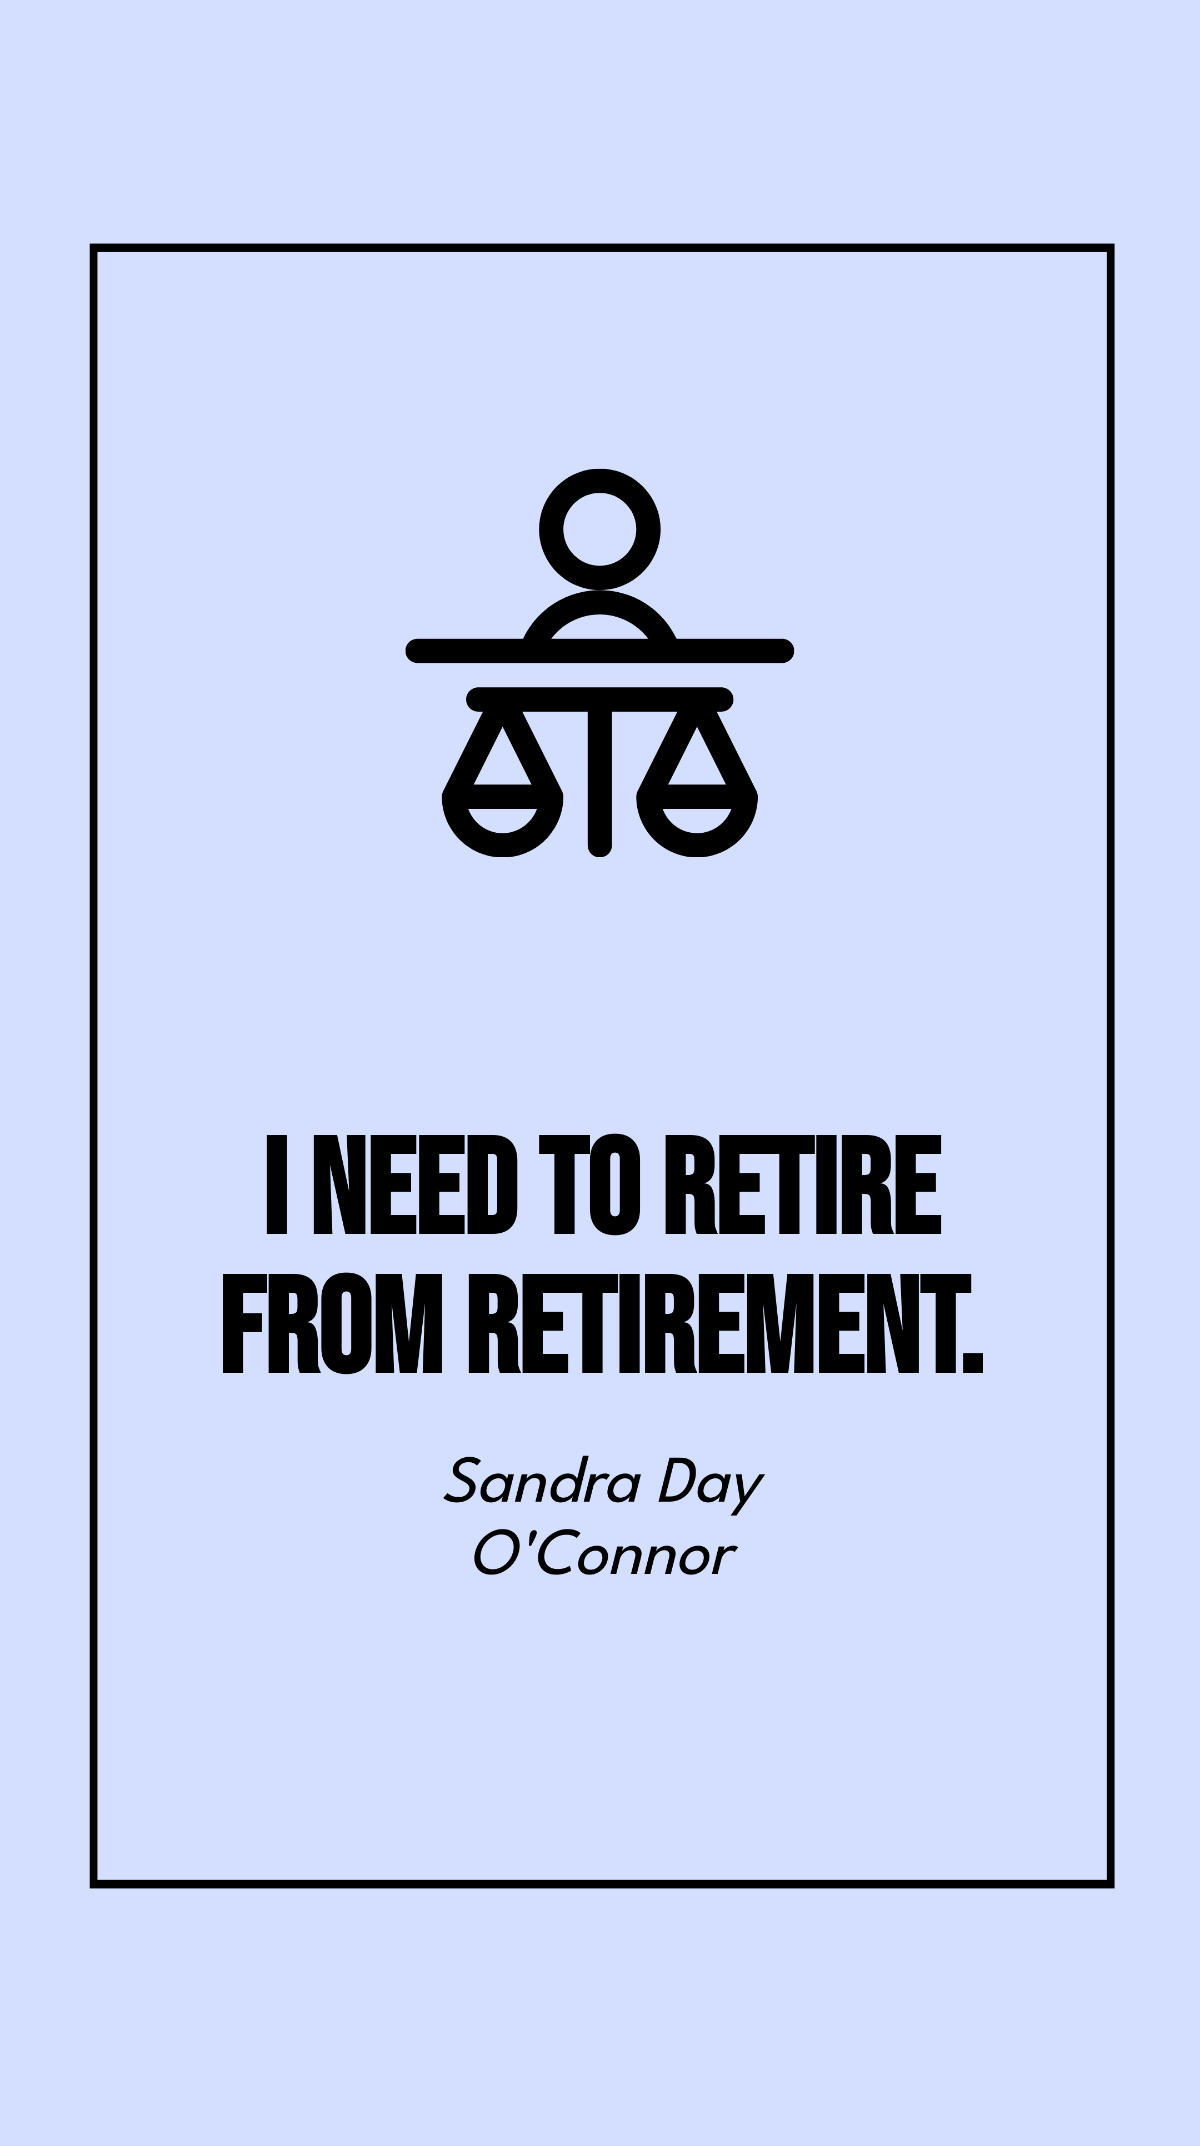 Sandra Day O'Connor - I need to retire from retirement.